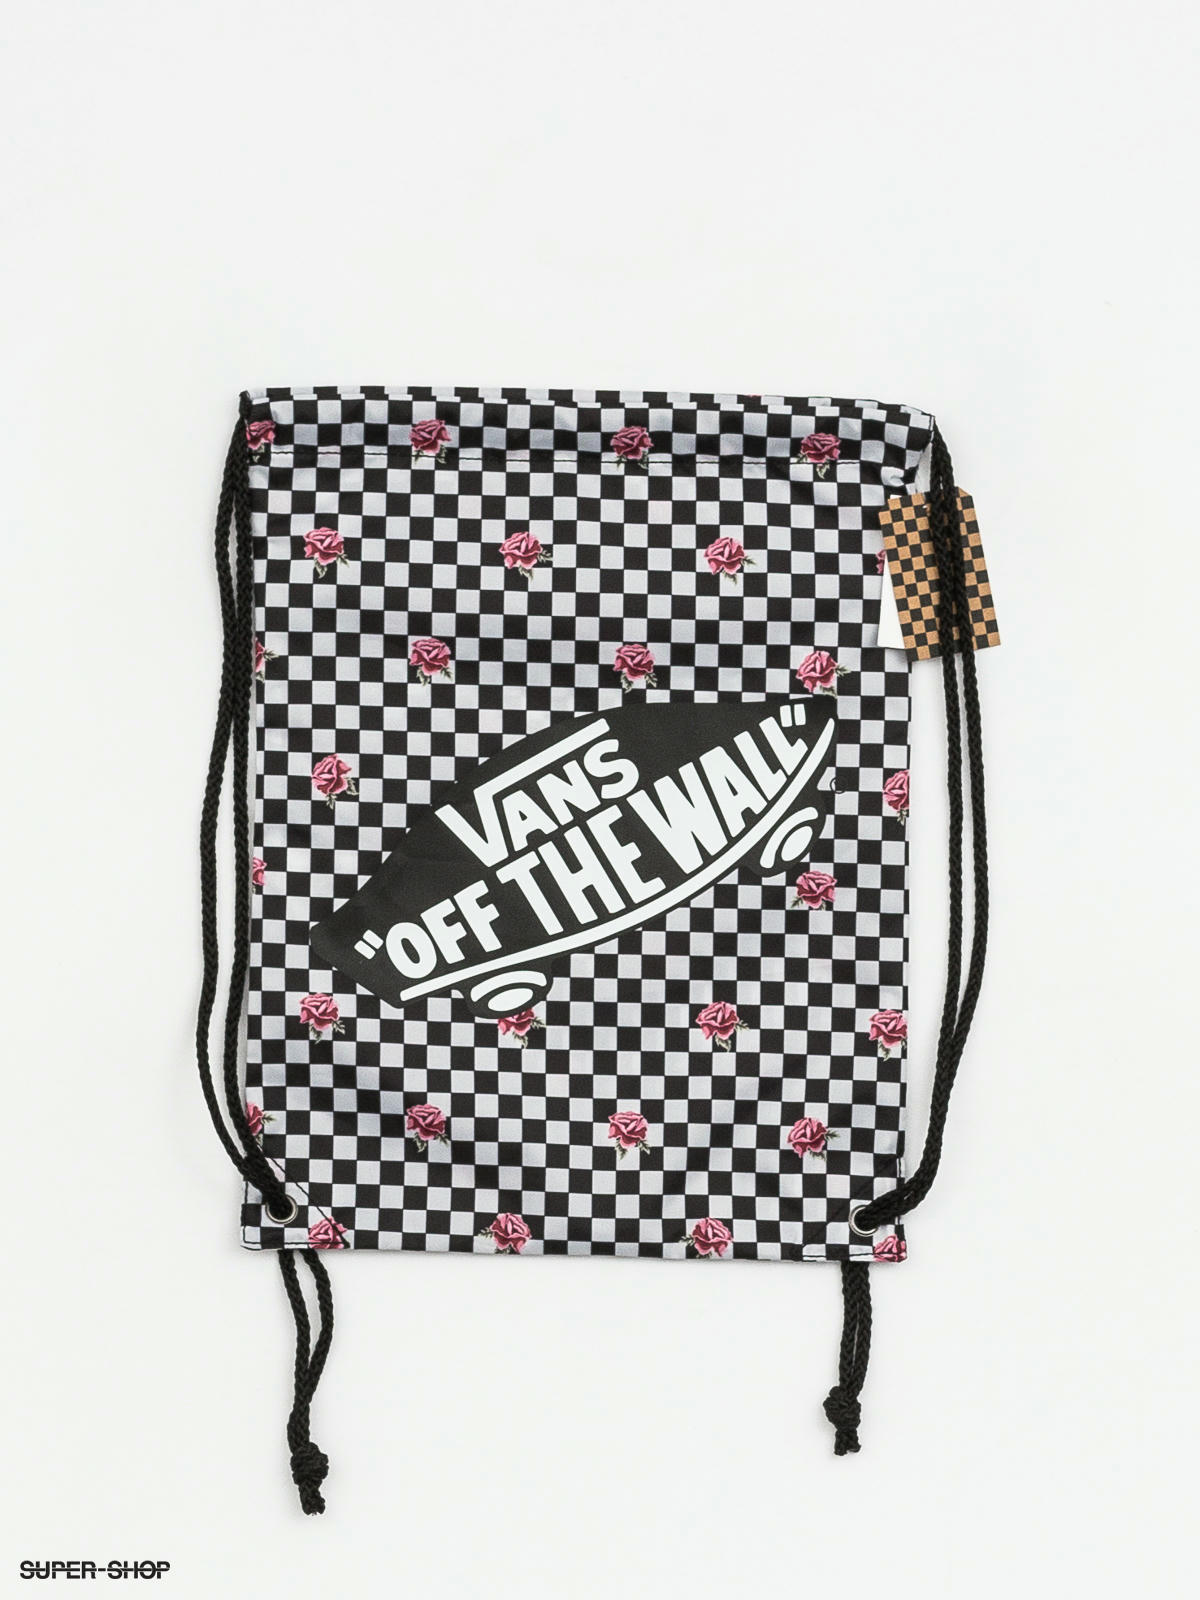 vans checkerboard with roses backpack